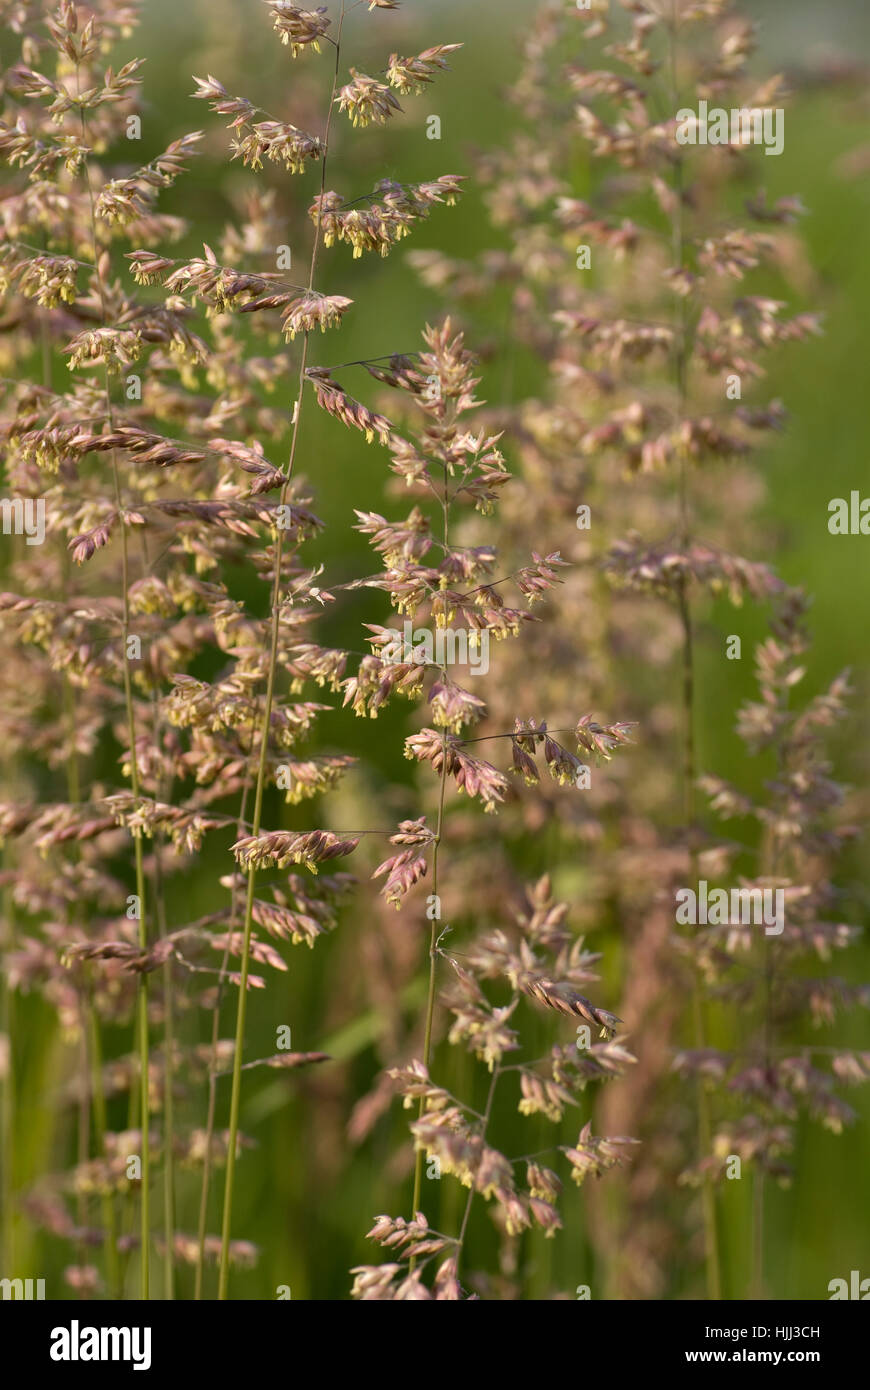 flower, plant, flora, reed, meadow, grass, lawn, green, backdrop, background, Stock Photo